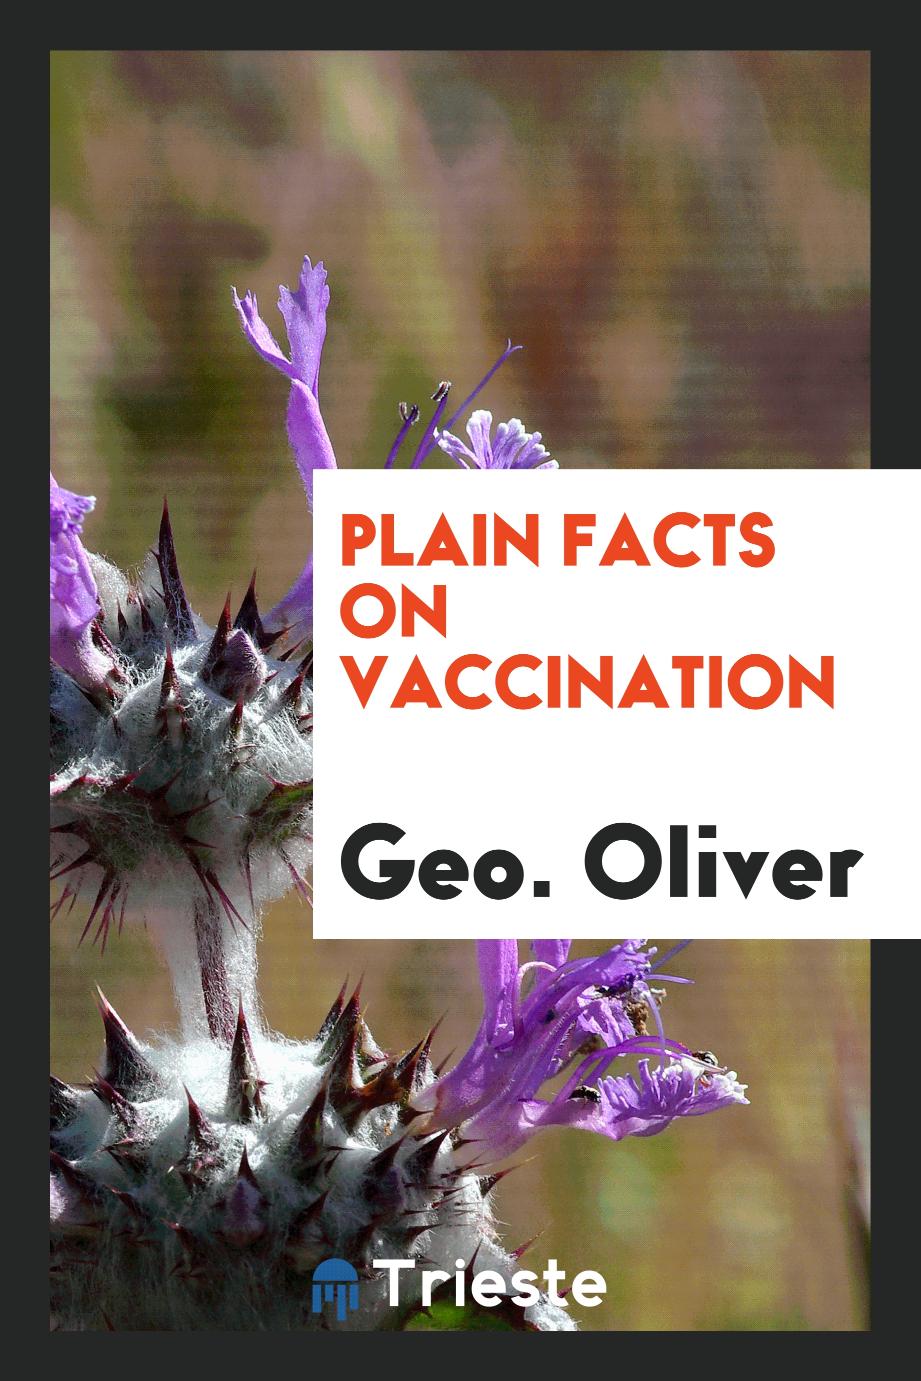 Plain facts on vaccination